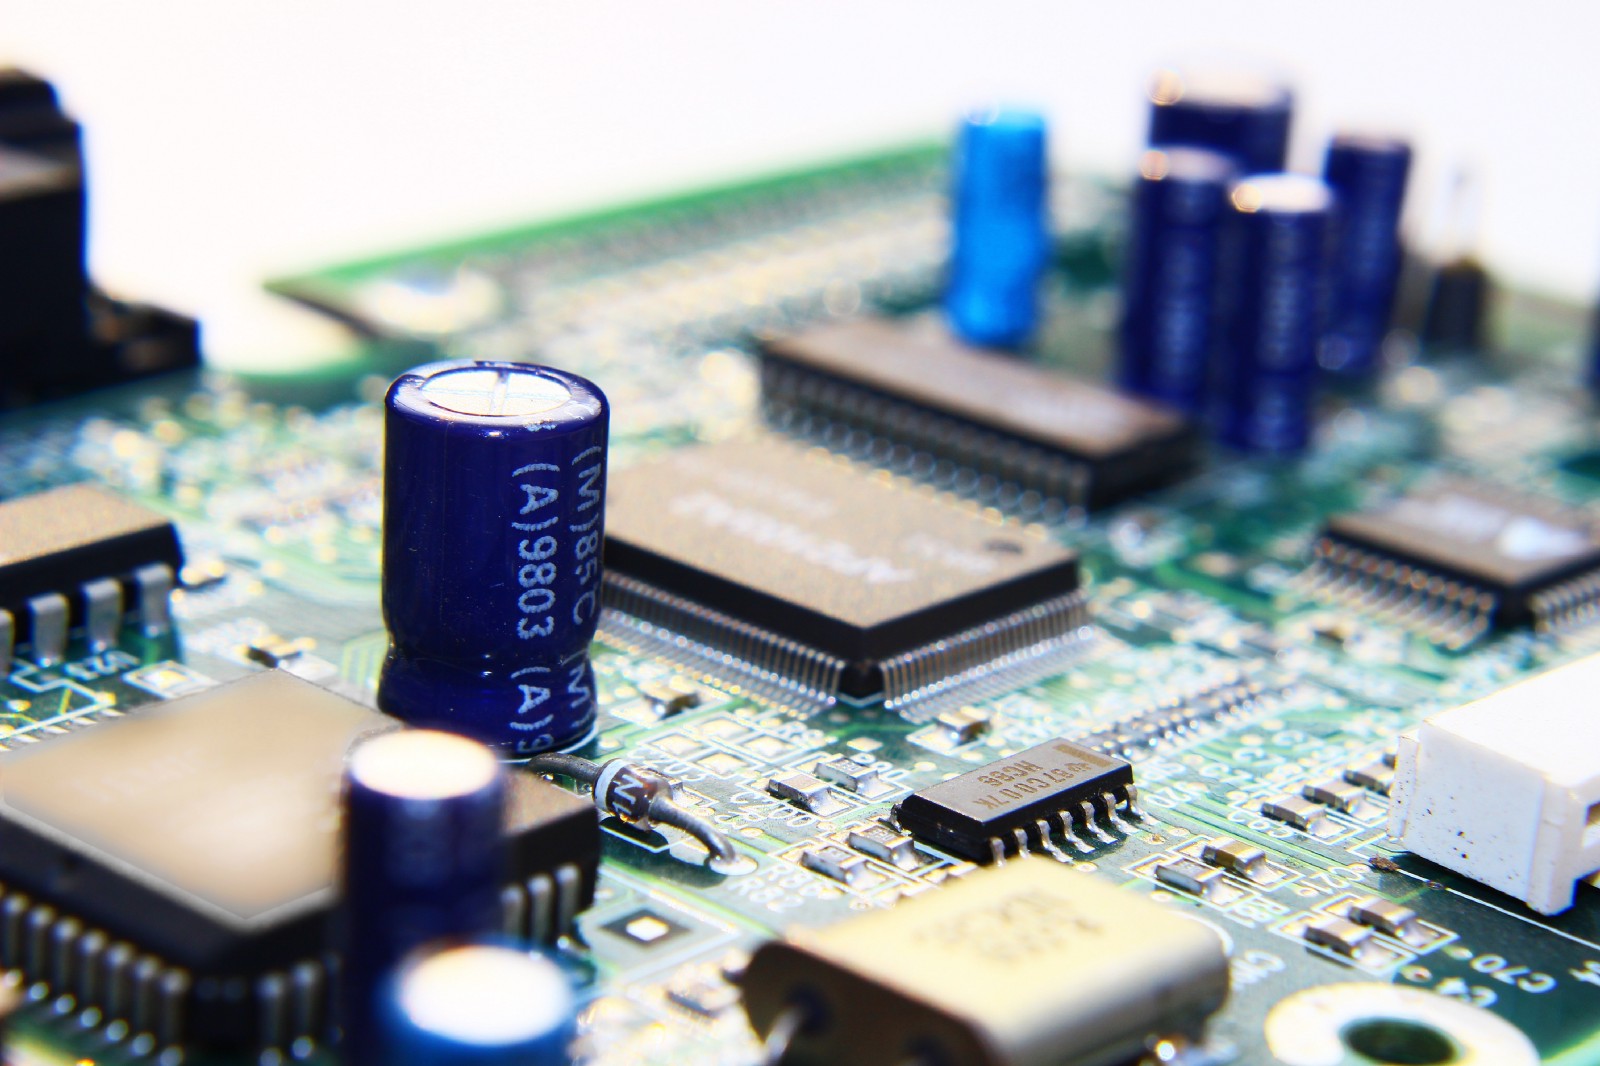 Industry Trend On Global Electronic Components System Market Drivers, Latest Innovations & Company Profiles to 2026 | ABB, AEC, API Technologies